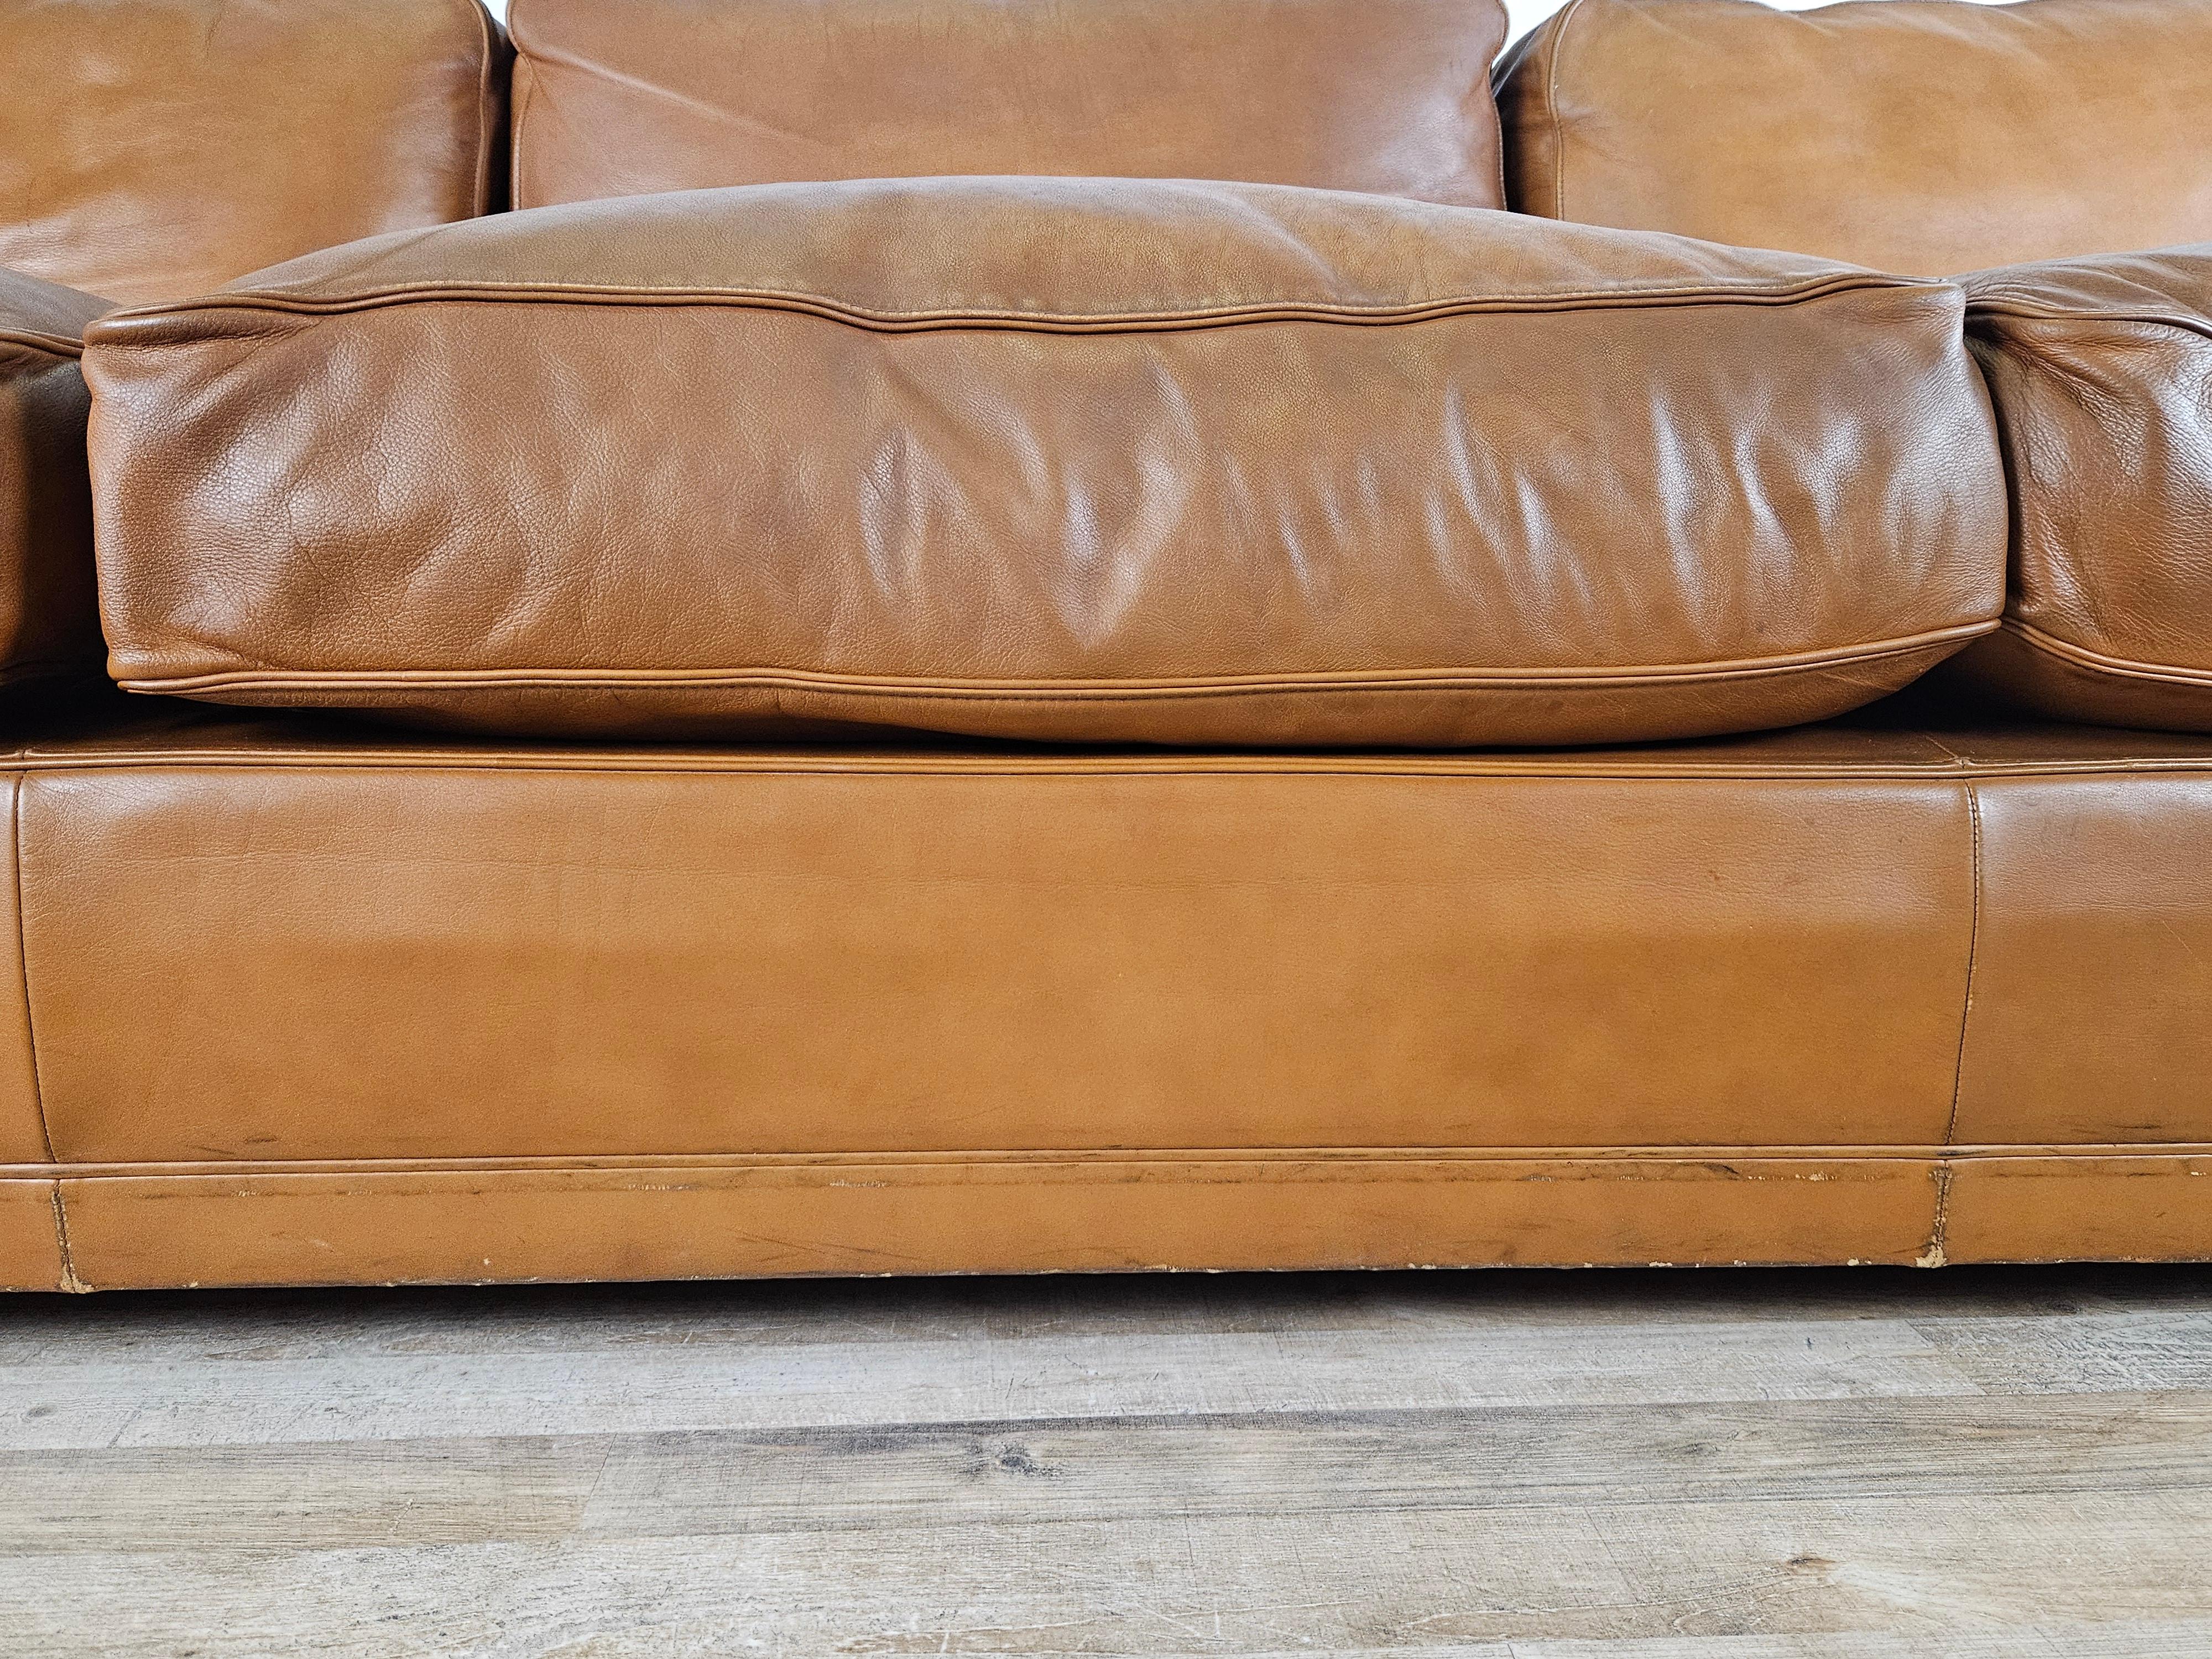 Poltrona Frau three-seater 1970s sofa in cognac-colored leather For Sale 4